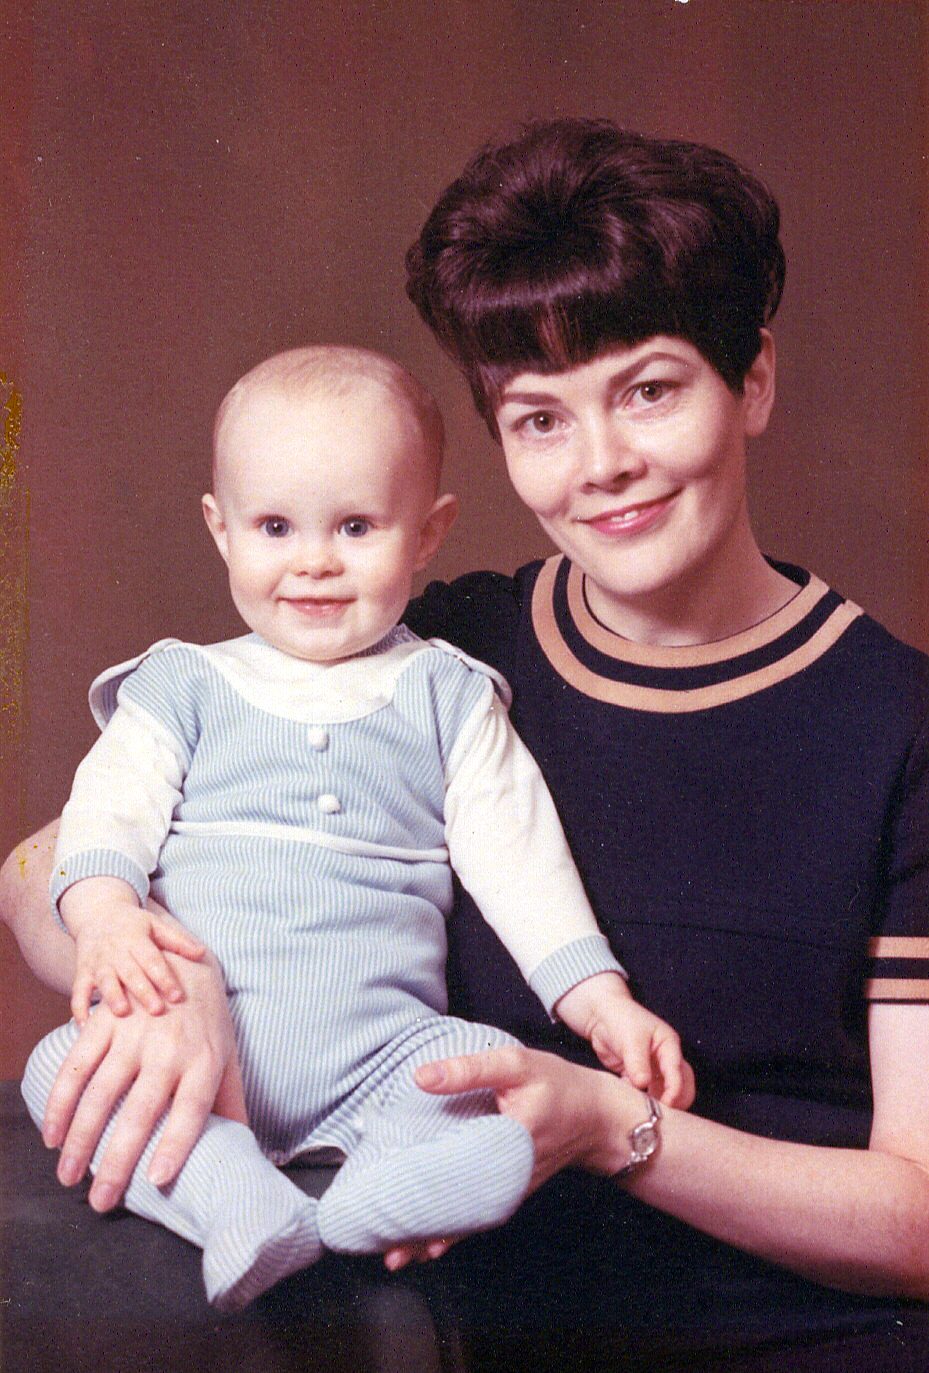 Frances and her son in 1969